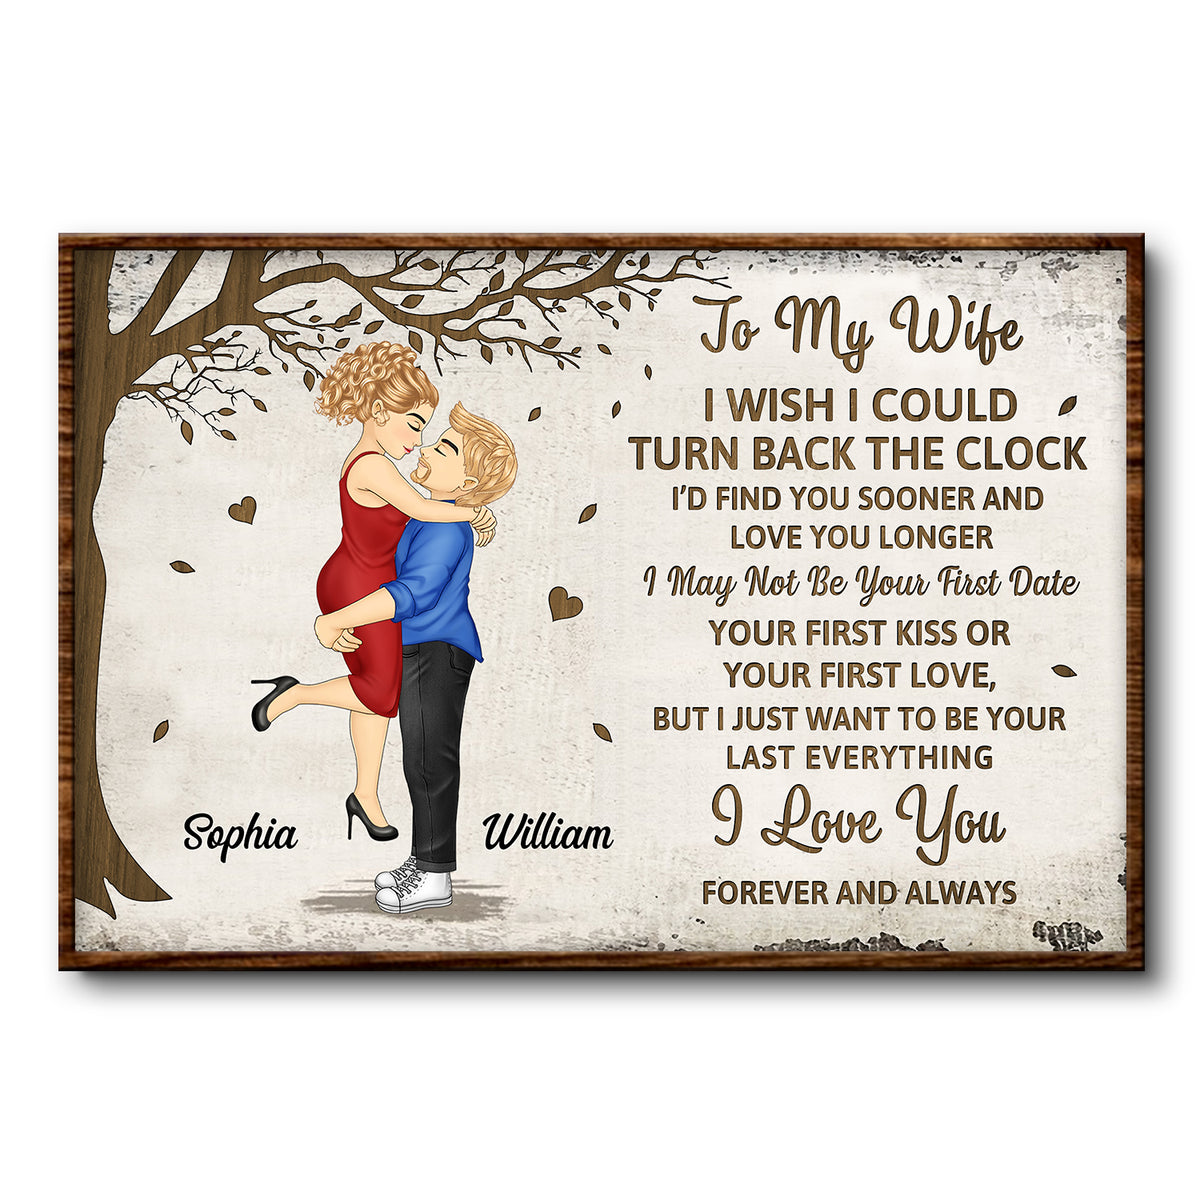 Discover I Wish I Could Turn Back The Clock - Loving Gift For Couples - Personalized Poster